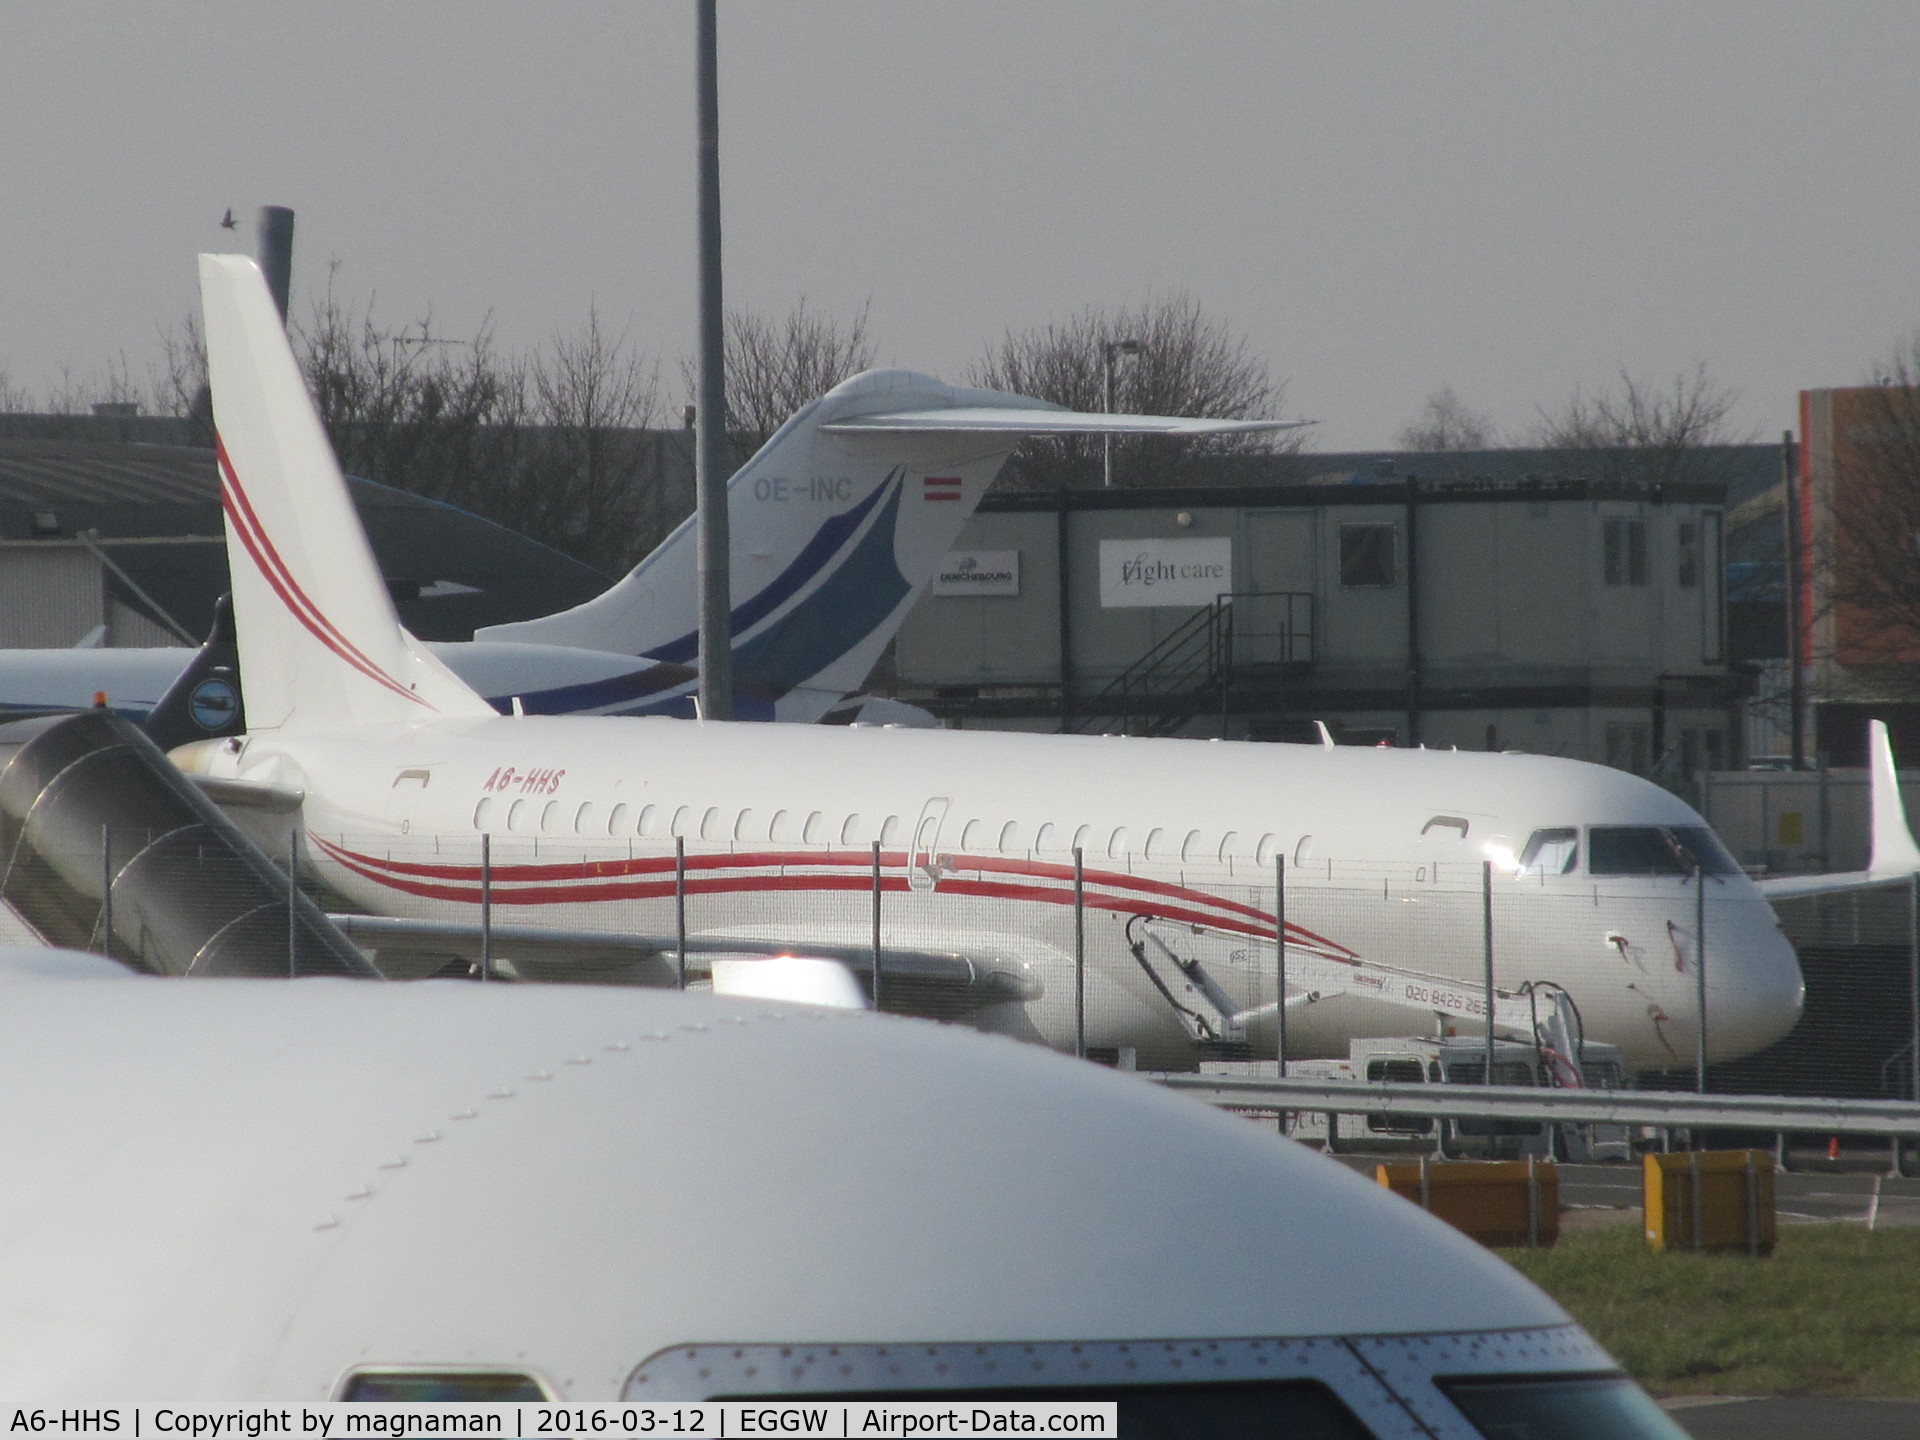 A6-HHS, 2010 Embraer ERJ-190-100ECJ Lineage 1000 C/N 19000296, at luton - viewed from long term CP